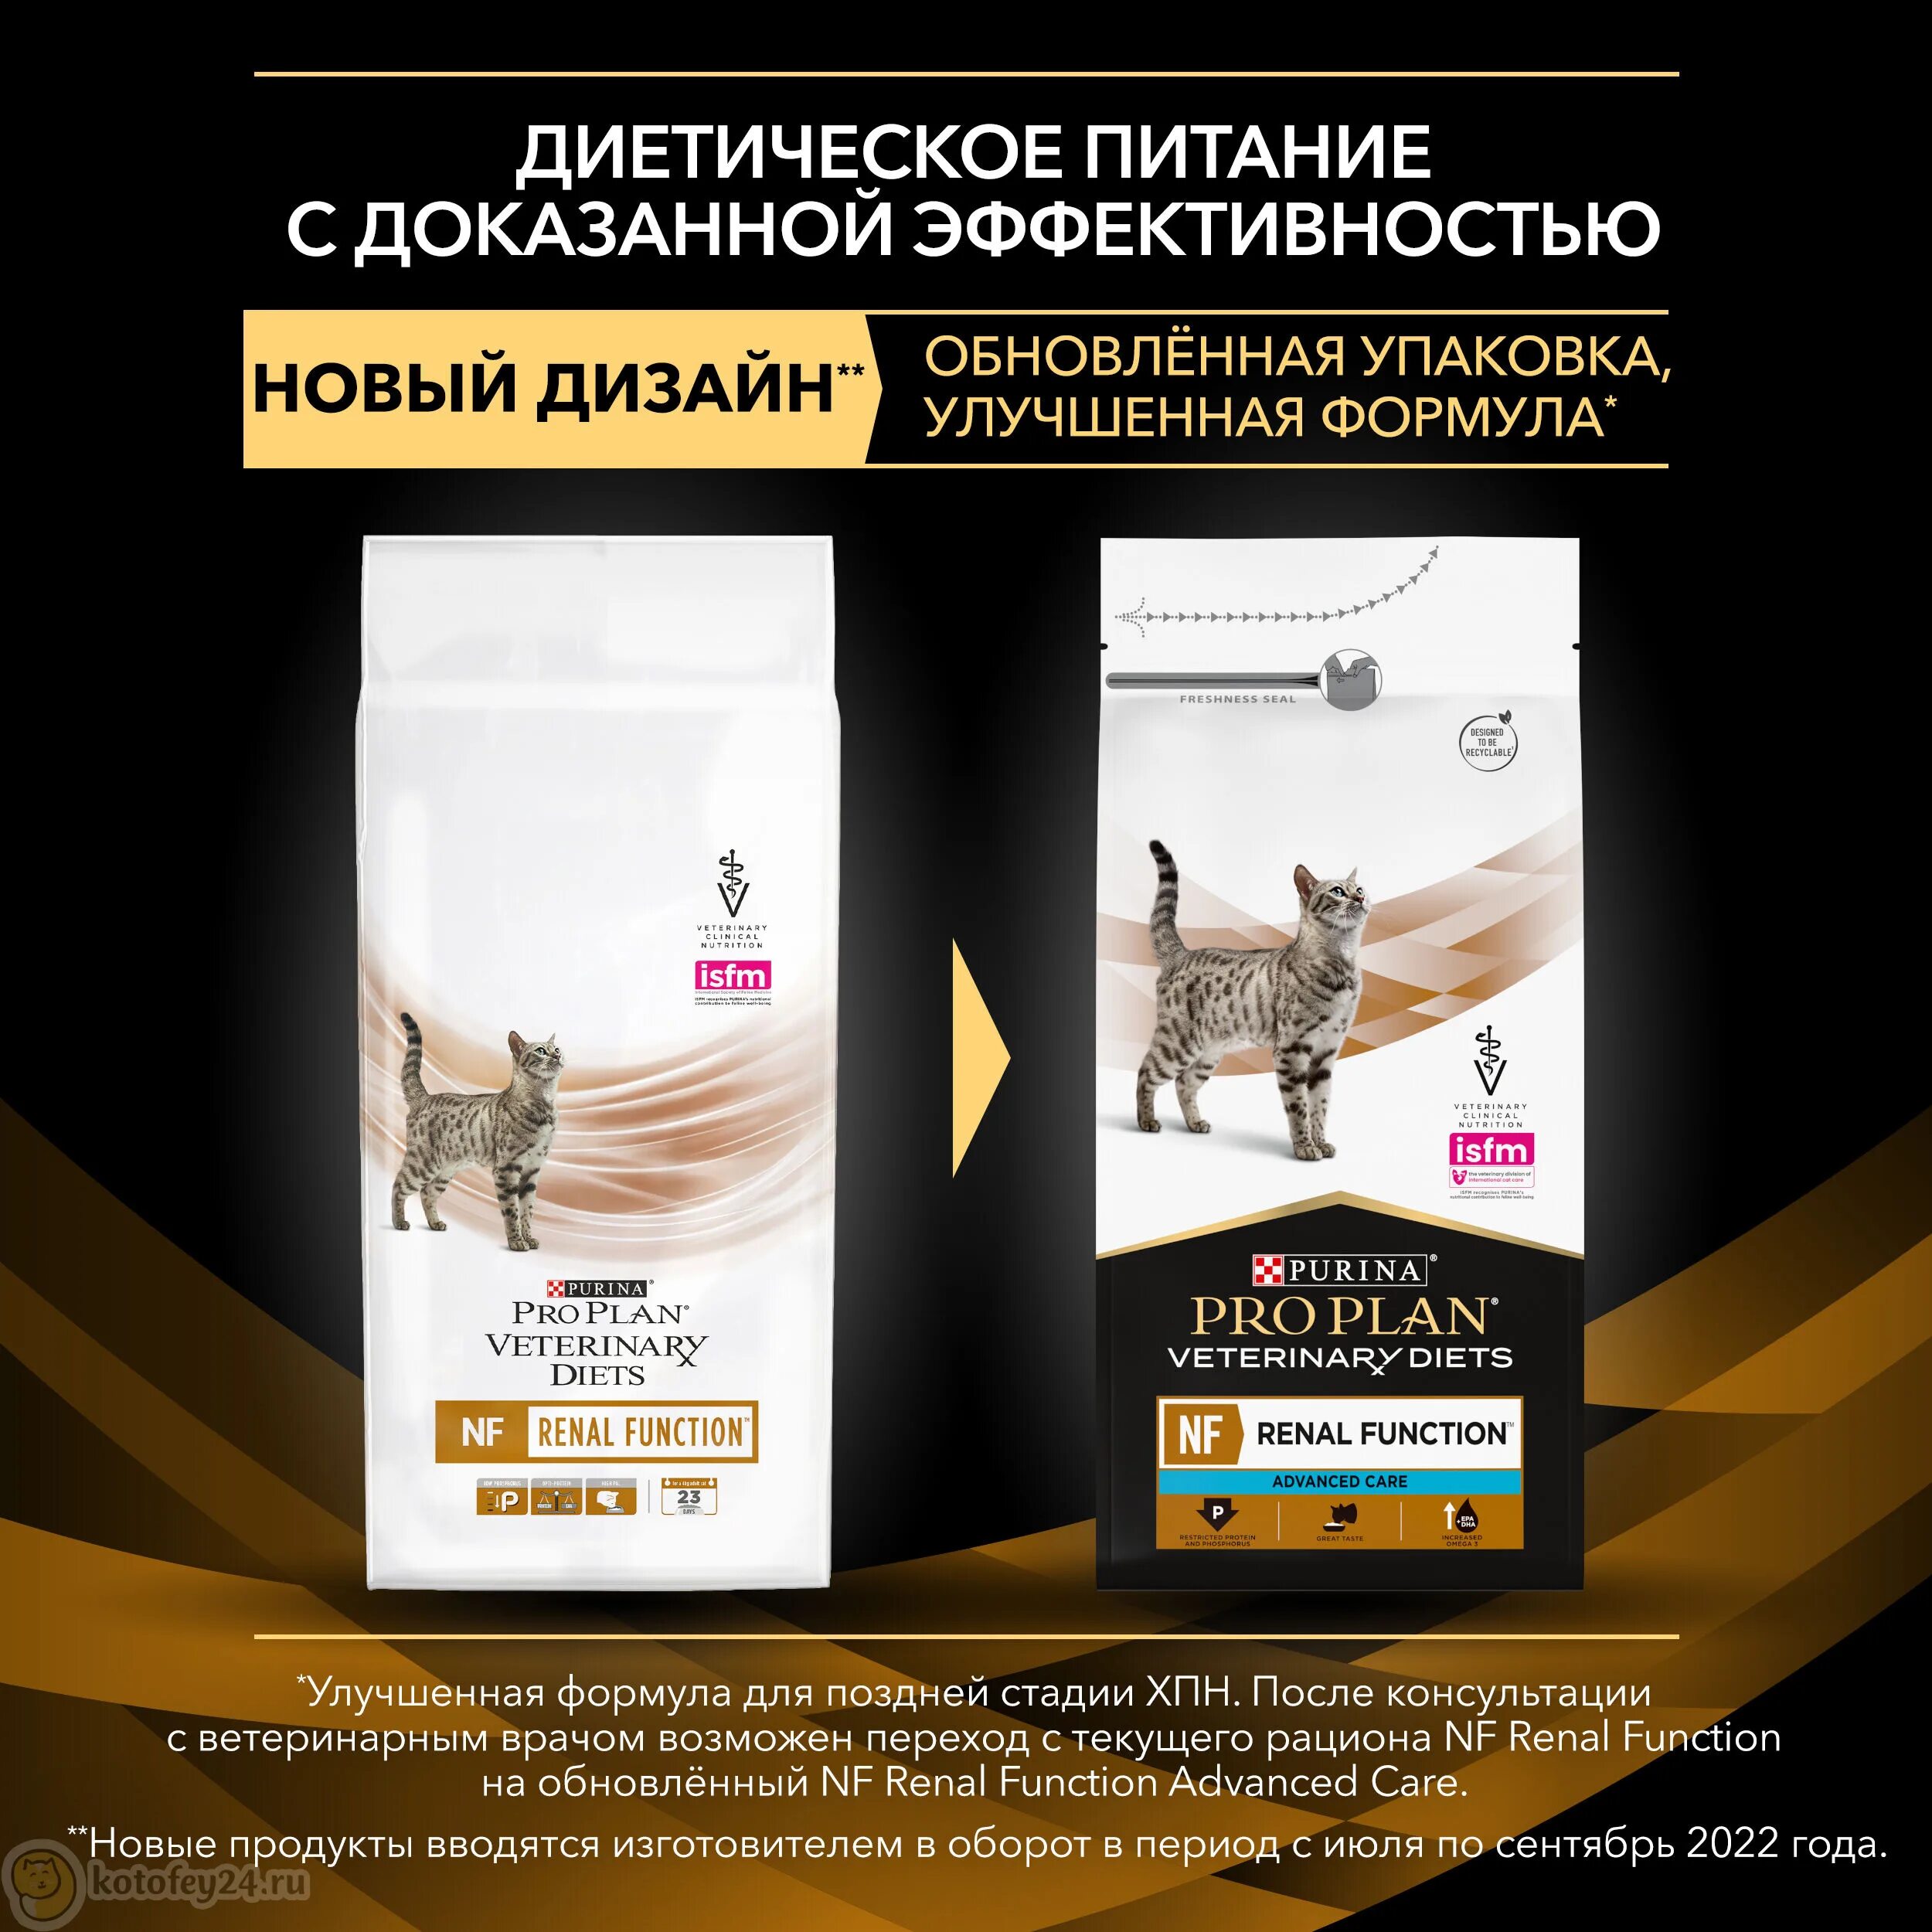 Pro Plan Veterinary renal Advanced Care. Pro Plan Veterinary Diets renal function для кошек. Pro Plan Veterinary Diets NF renal function. Purina Pro Plan Veterinary Diets renal function для кошек. Pro plan nf renal function advanced care